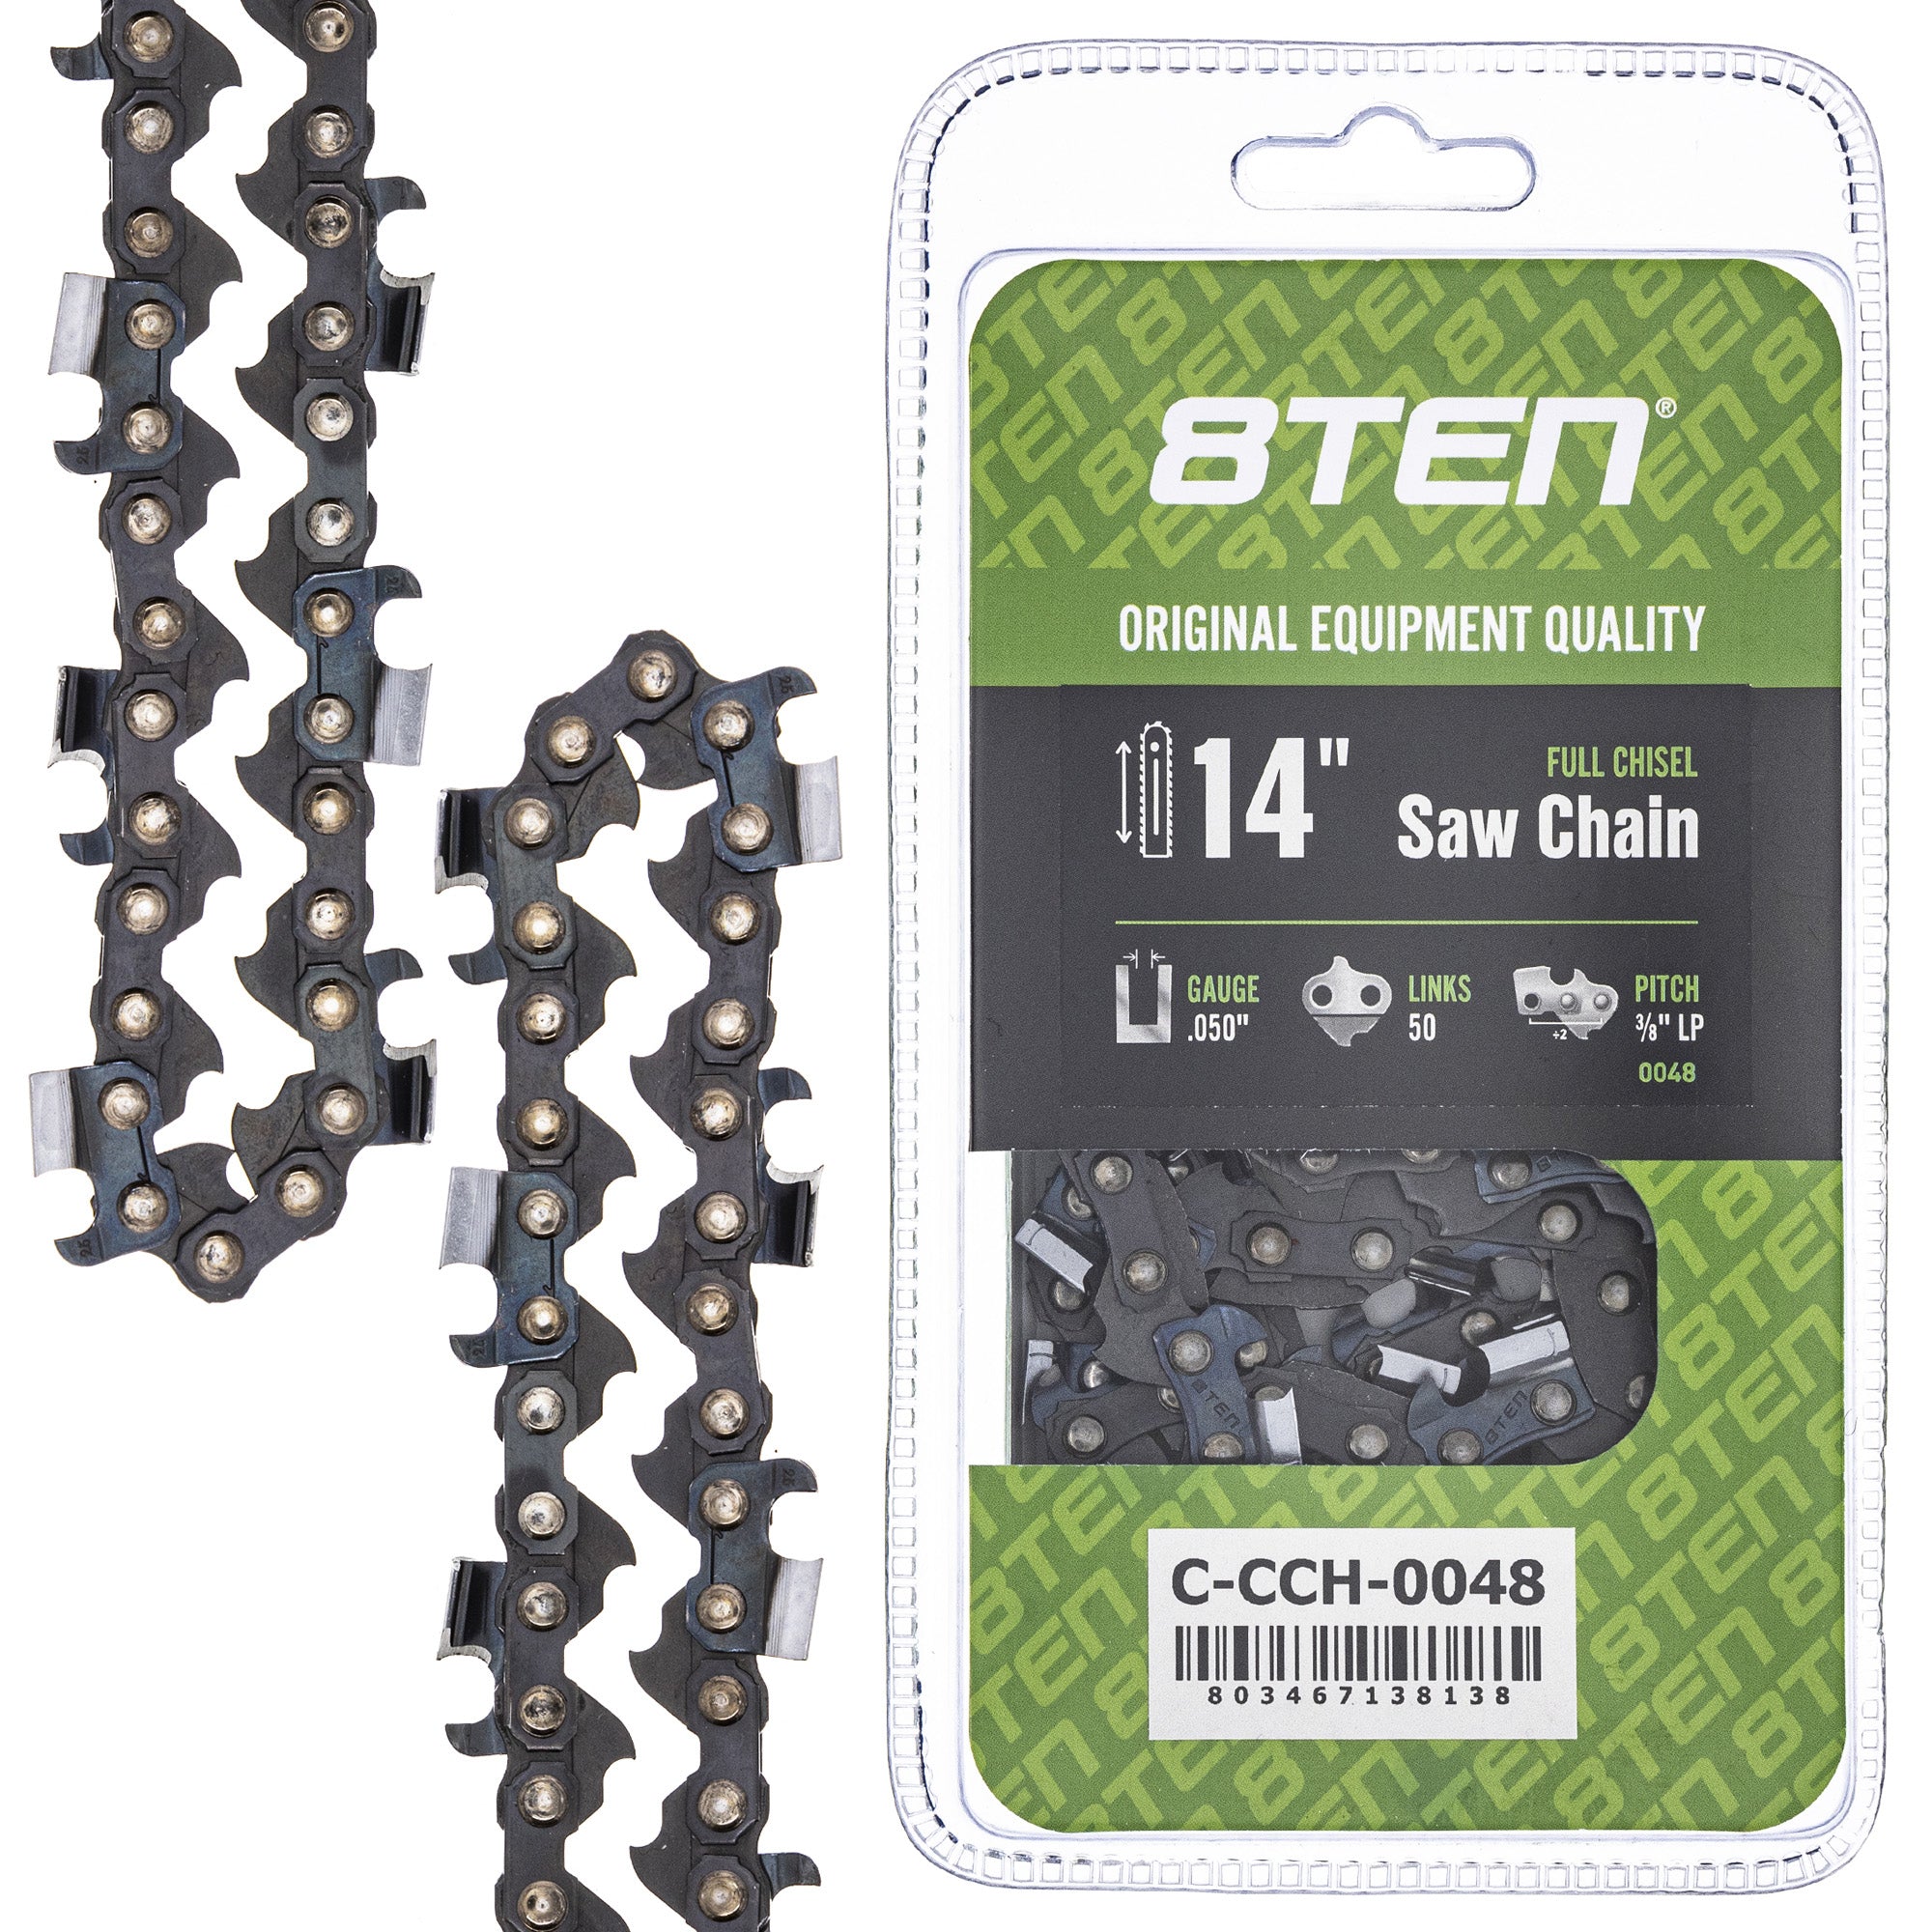 8TEN MK1010373 Guide Bar & Chain for MSE MS HT E